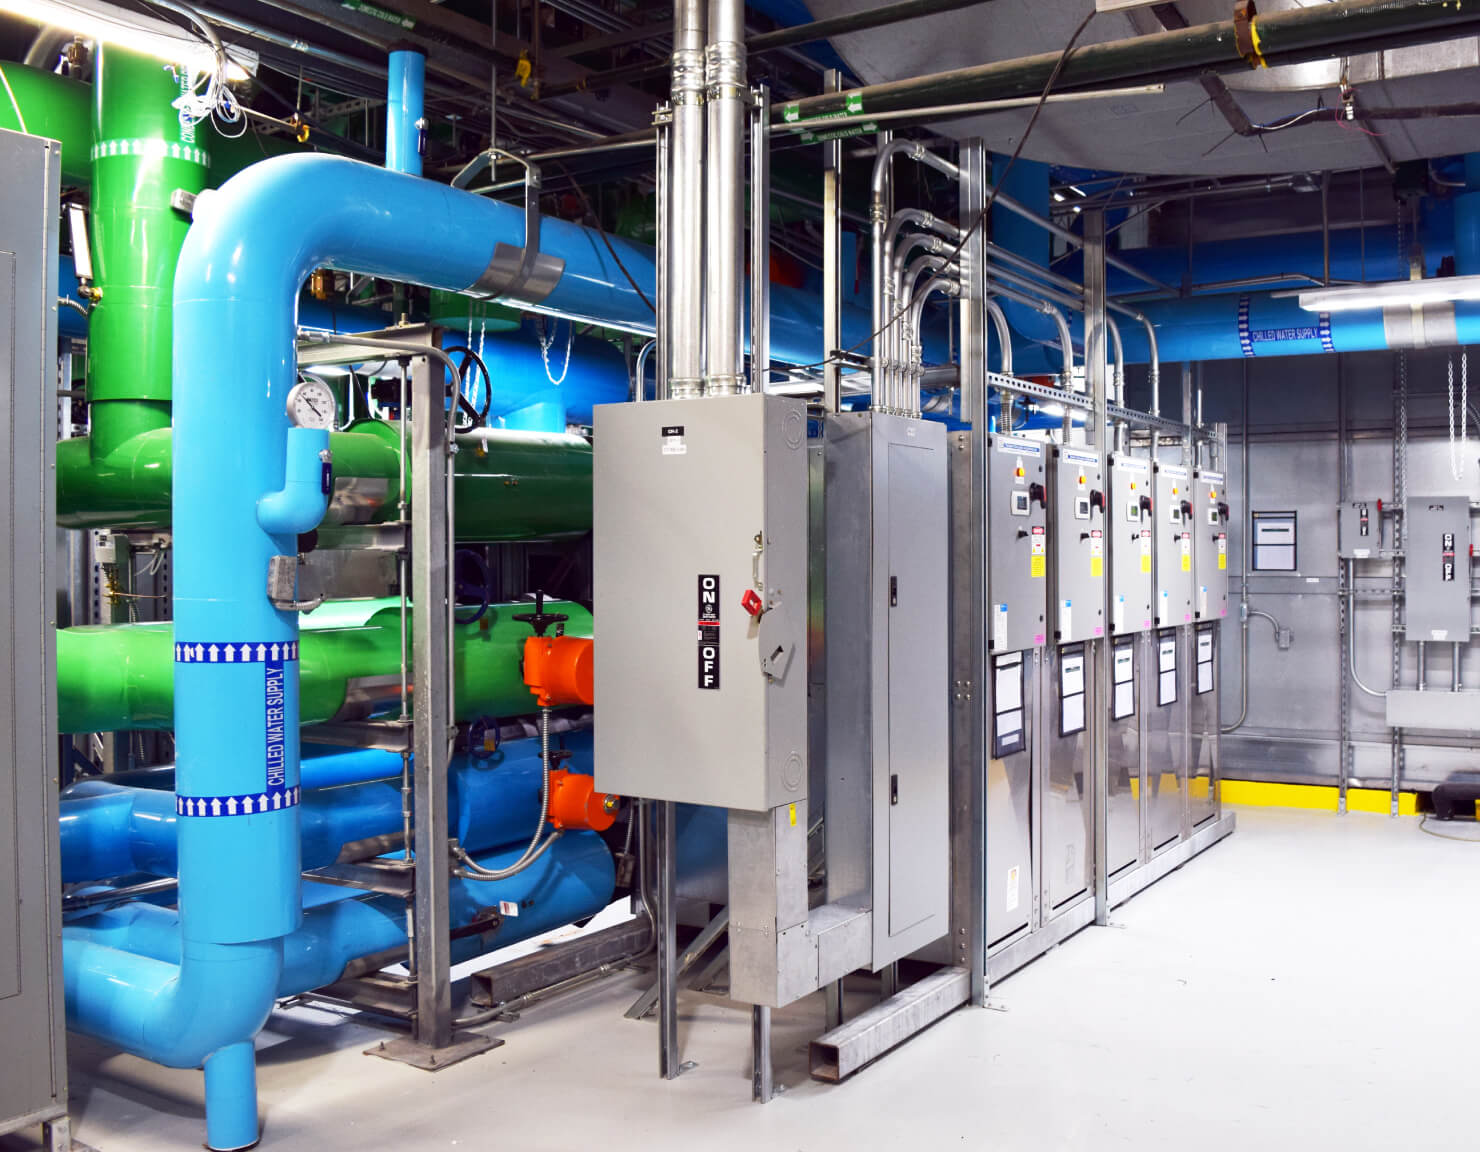 Image of 1500 K Street’s state-of-the-art HVAC system including new mechanical base equipment